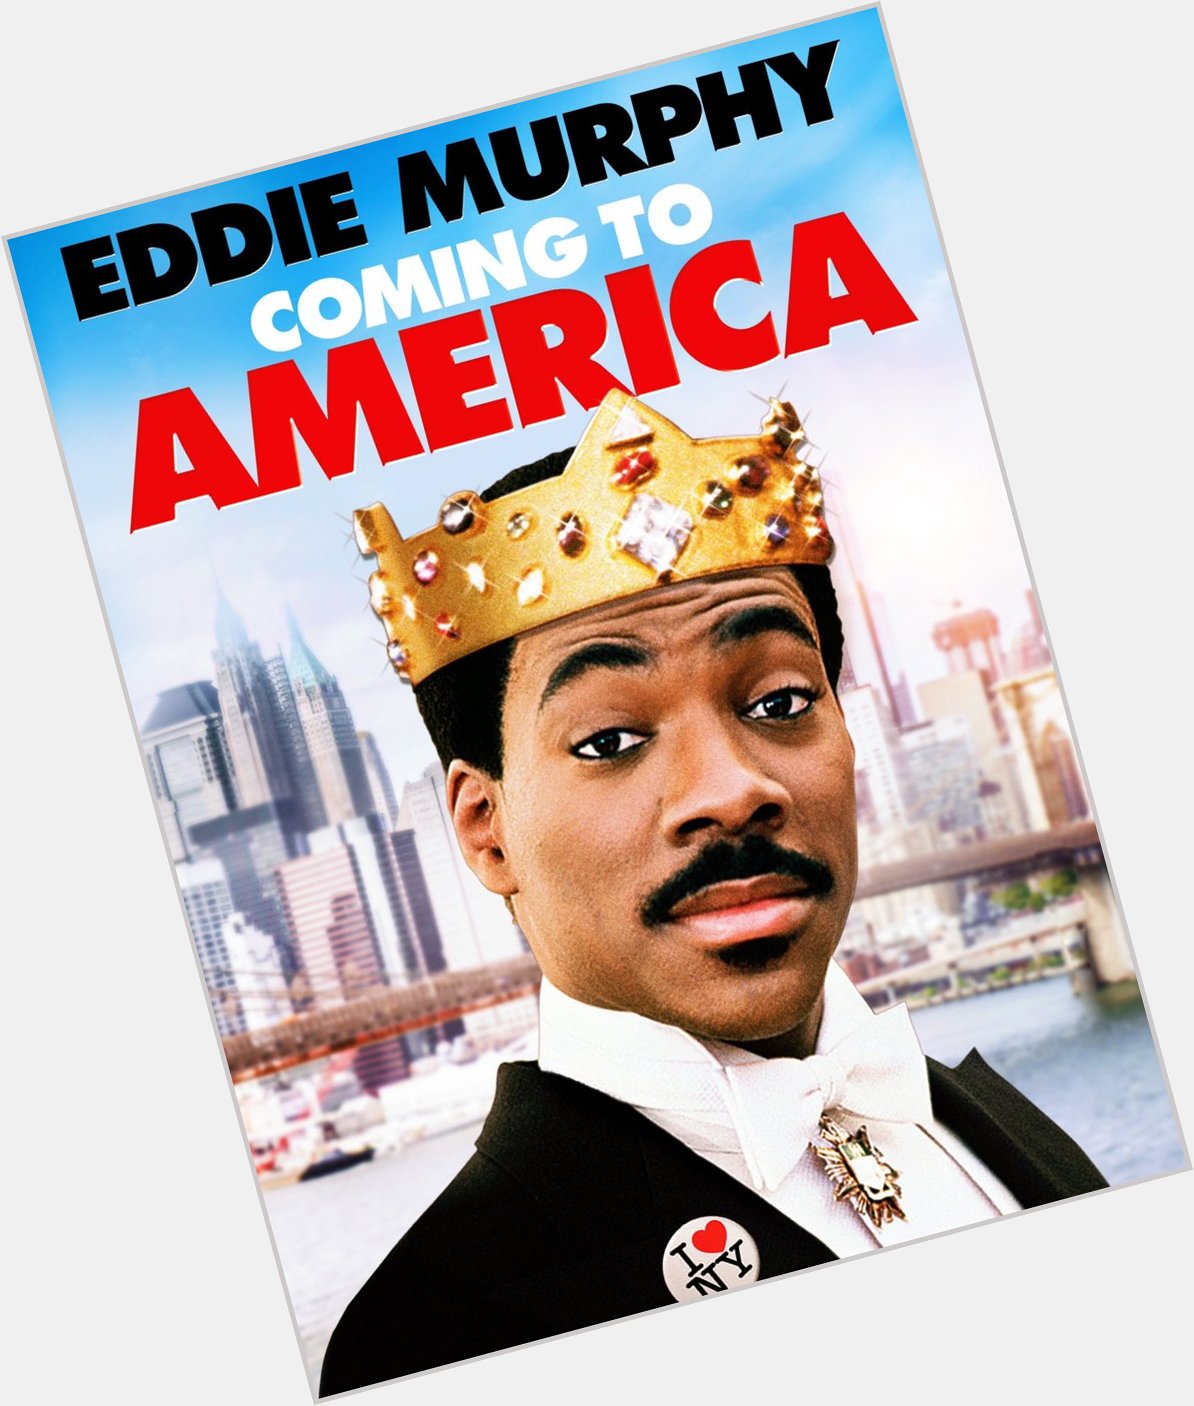 Happy Birthday to Eddie Murphy who is 60 today! And also one of the funniest men in film! 